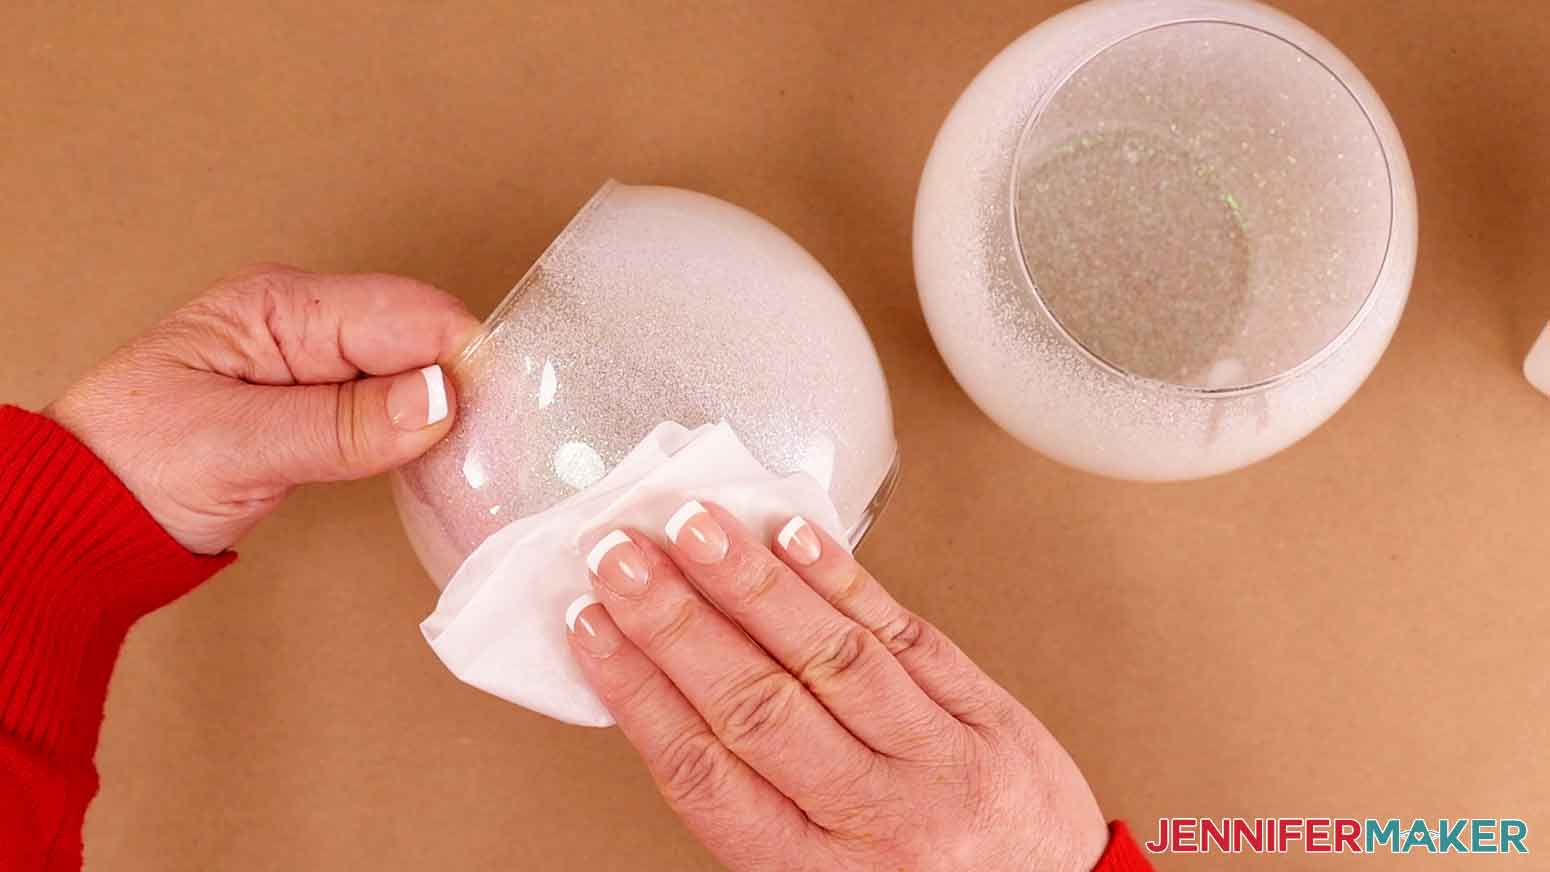 Use rubbing alcohol and a lint free cloth to clean the outside of the glass vase.